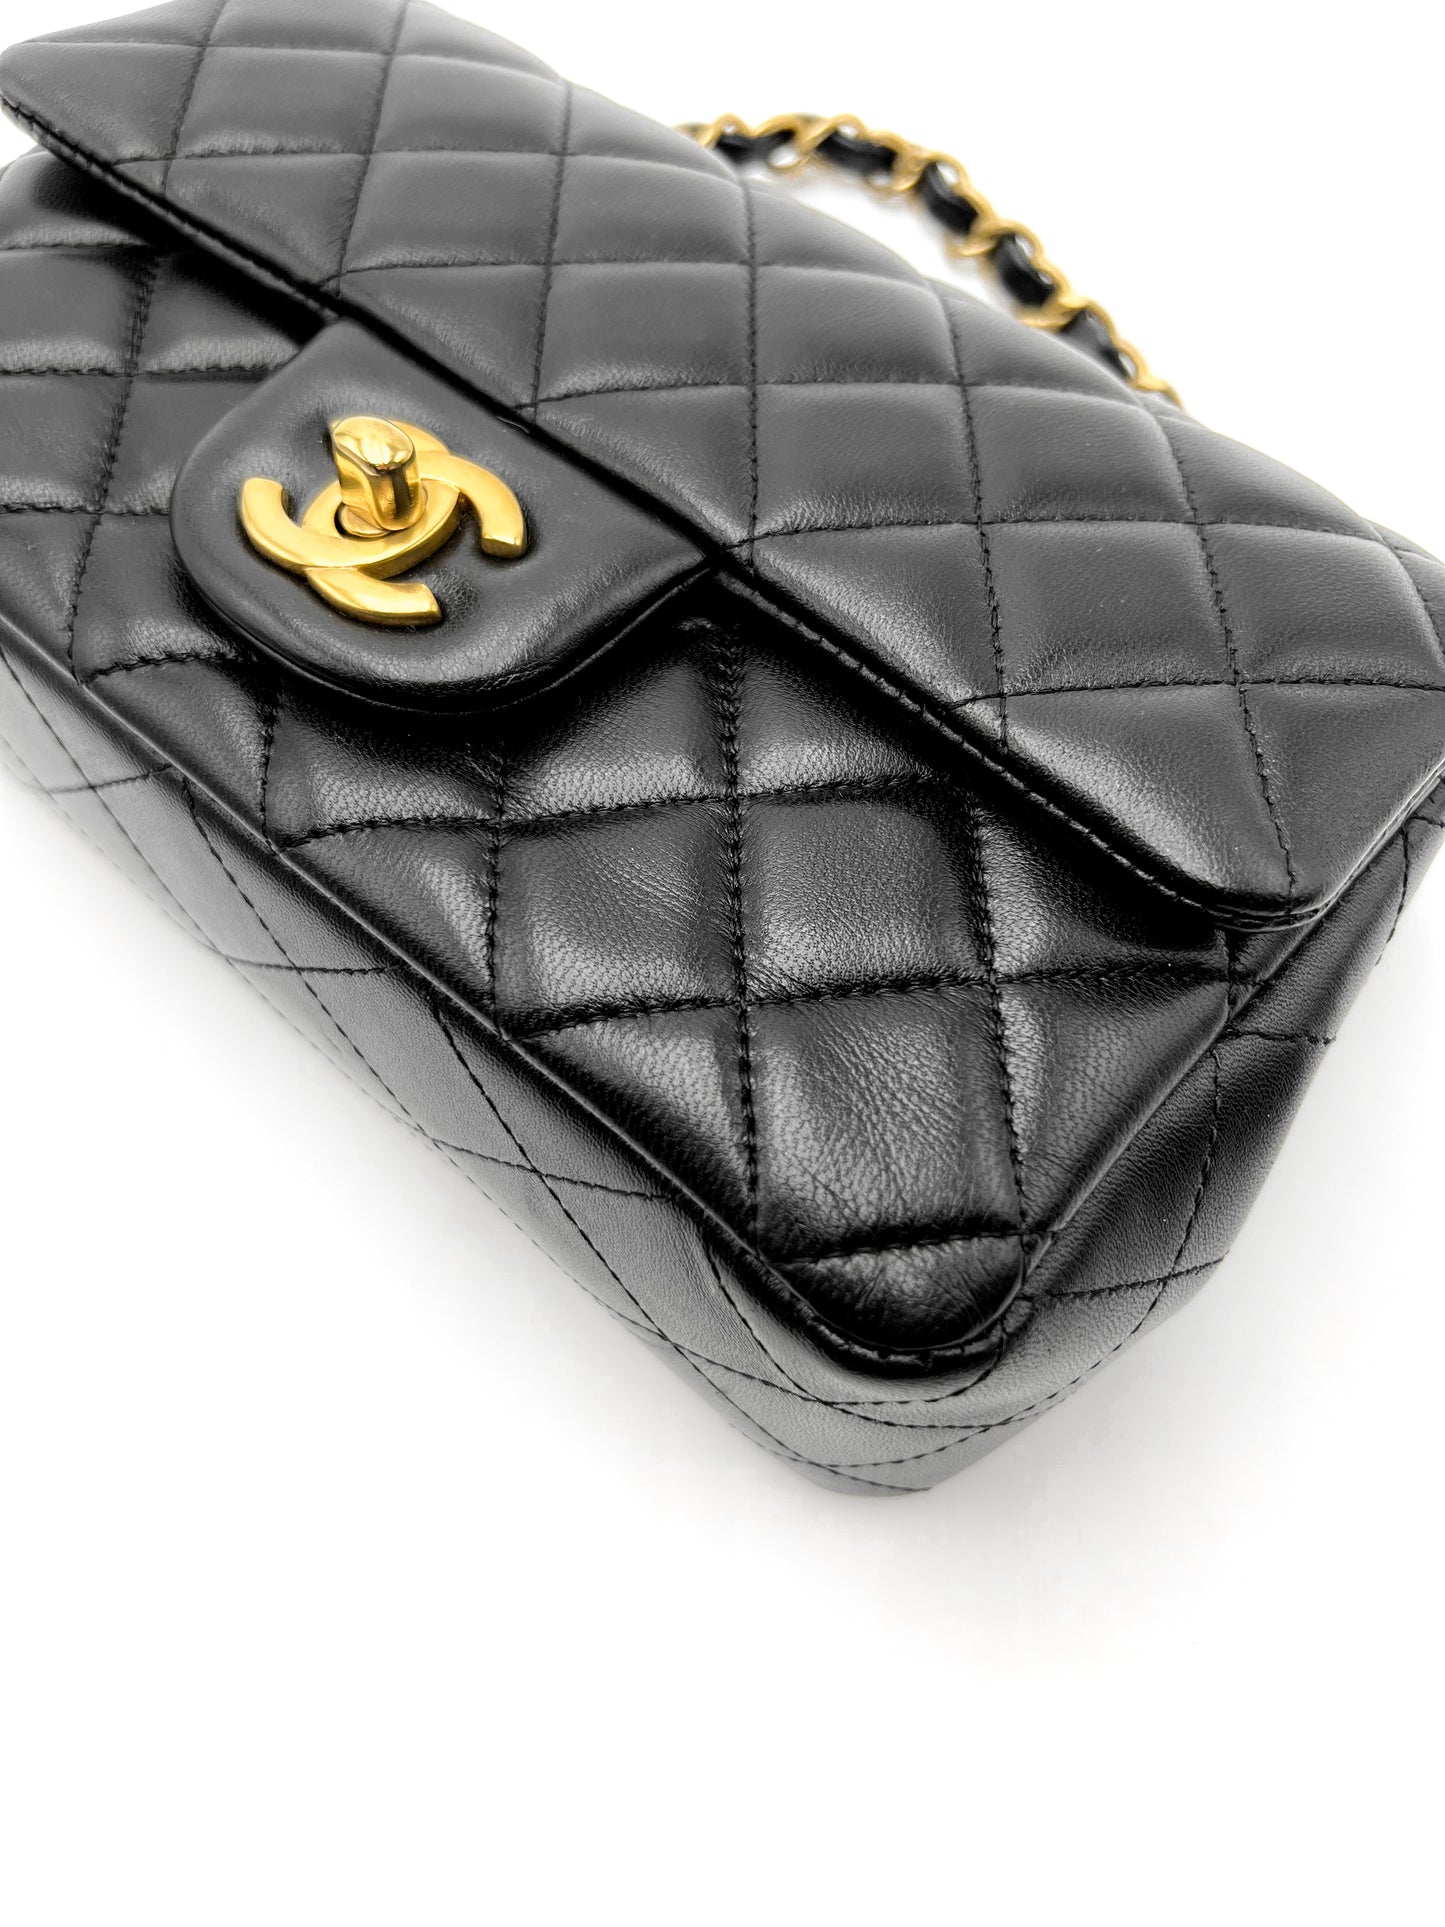 Chanel Mini Rectangle Flap Black with Gold Hardware